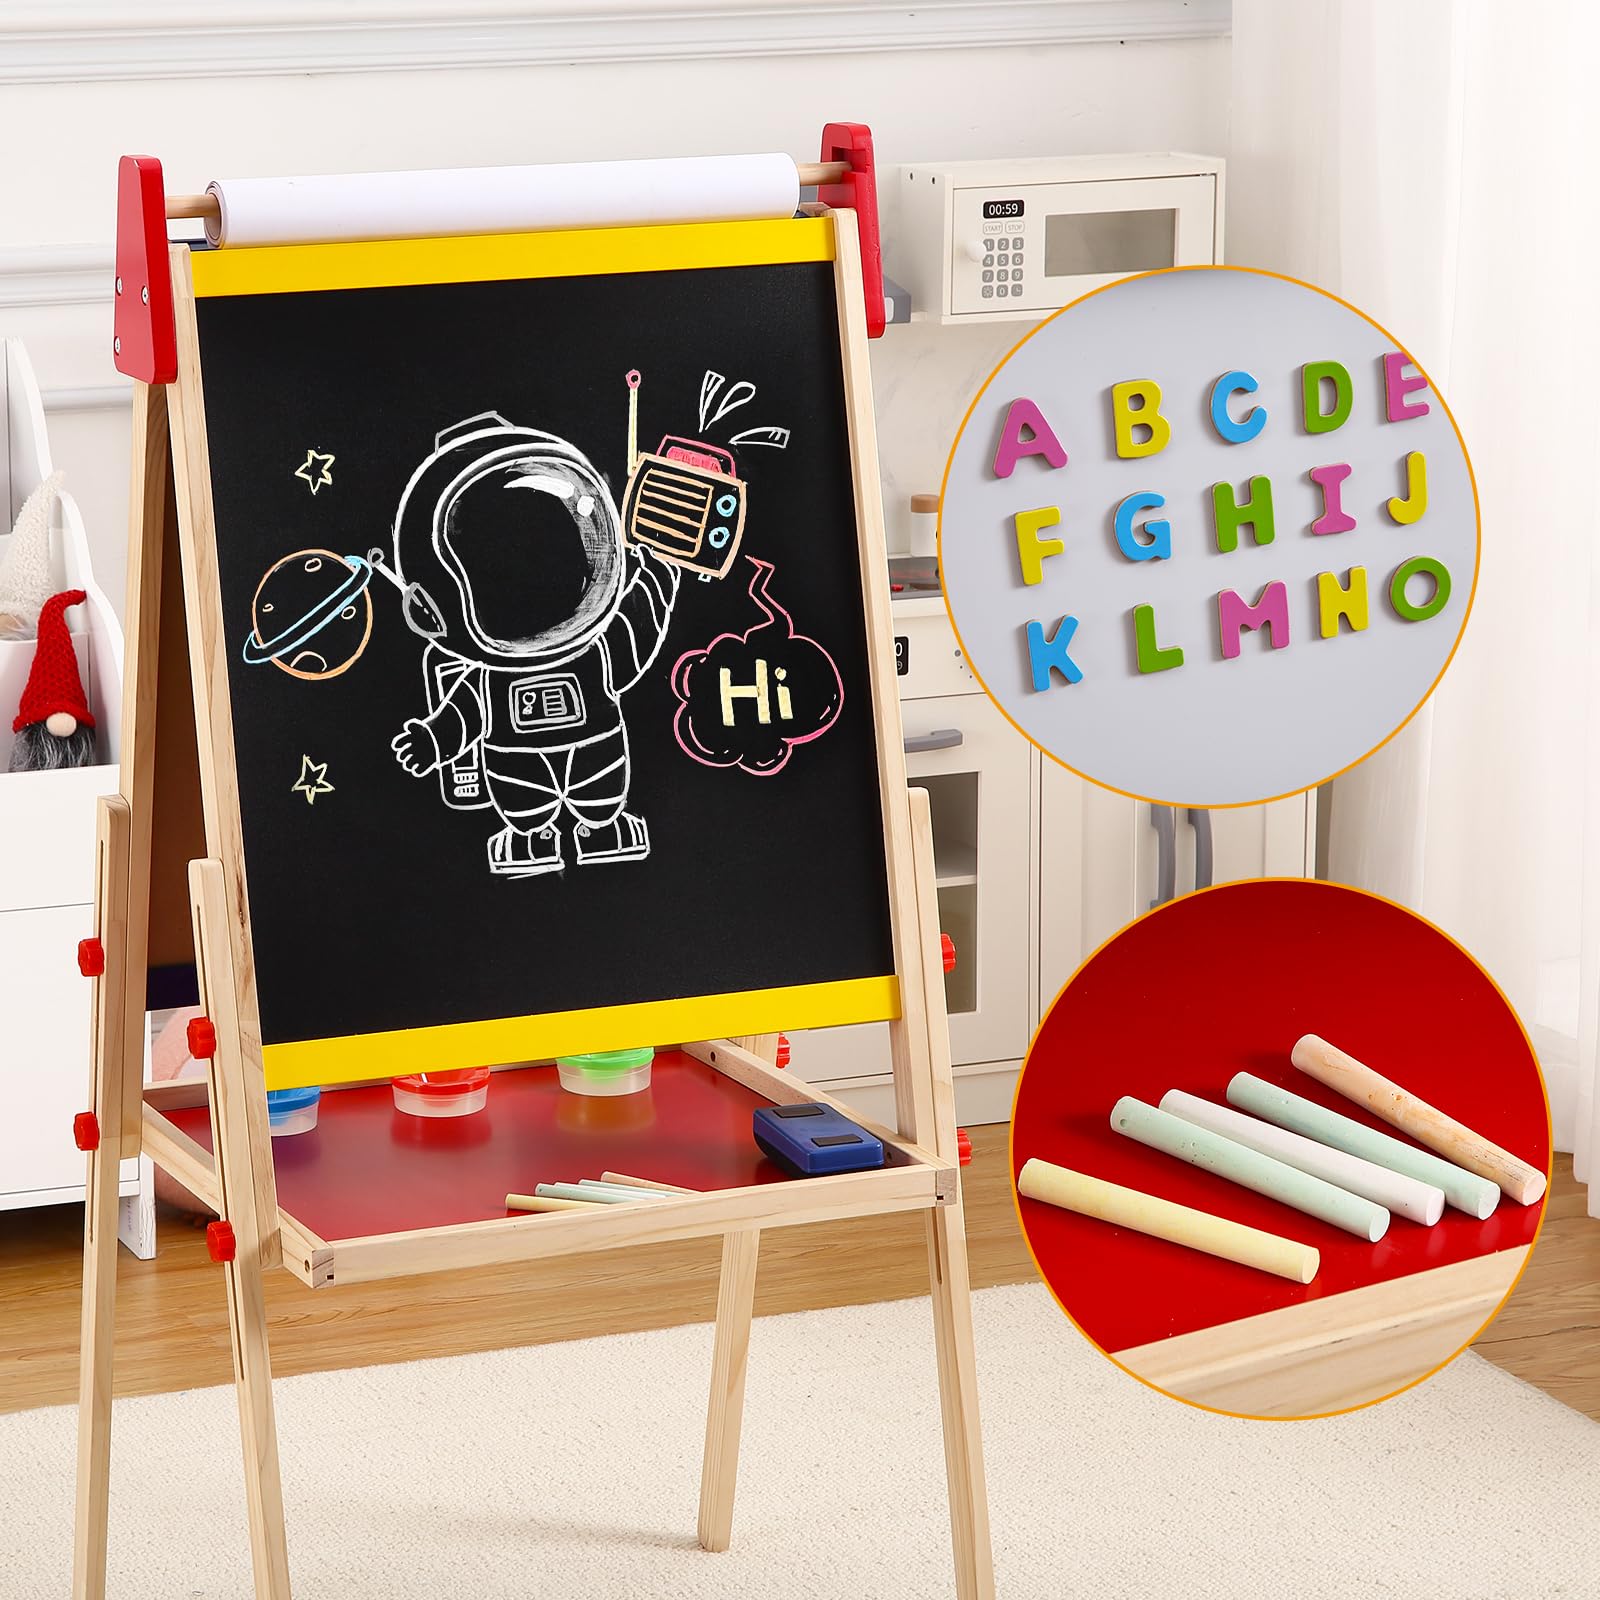 Art Easel for Kids, Adjustable Standing Kids Easel, Kids Easel Double Sided Wooden, White Board & Magnetic Drawing Board & Paper Roll, Paint Art Set for Kids Toddlers 2-4 4-8 9-12 （3+）